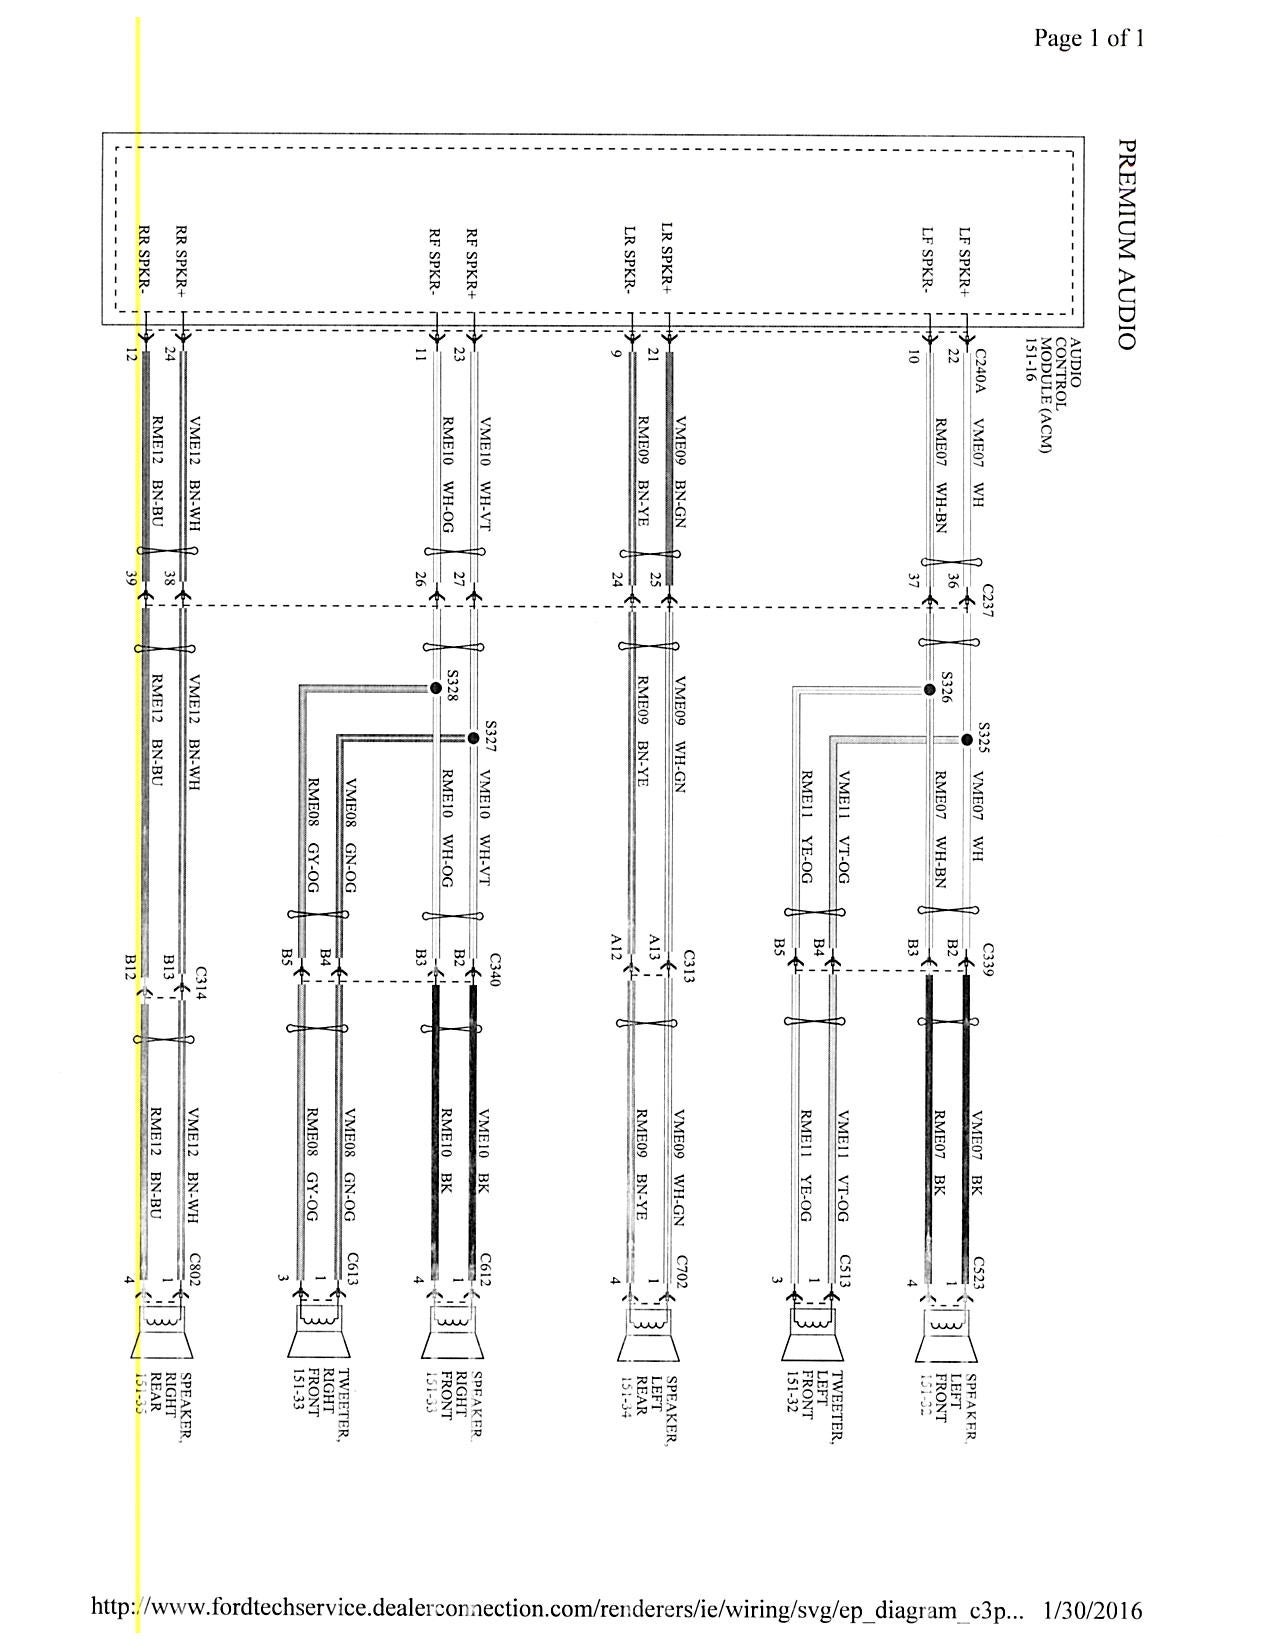 2008 Ford Focus Stereo Wiring Diagram from schematron.org